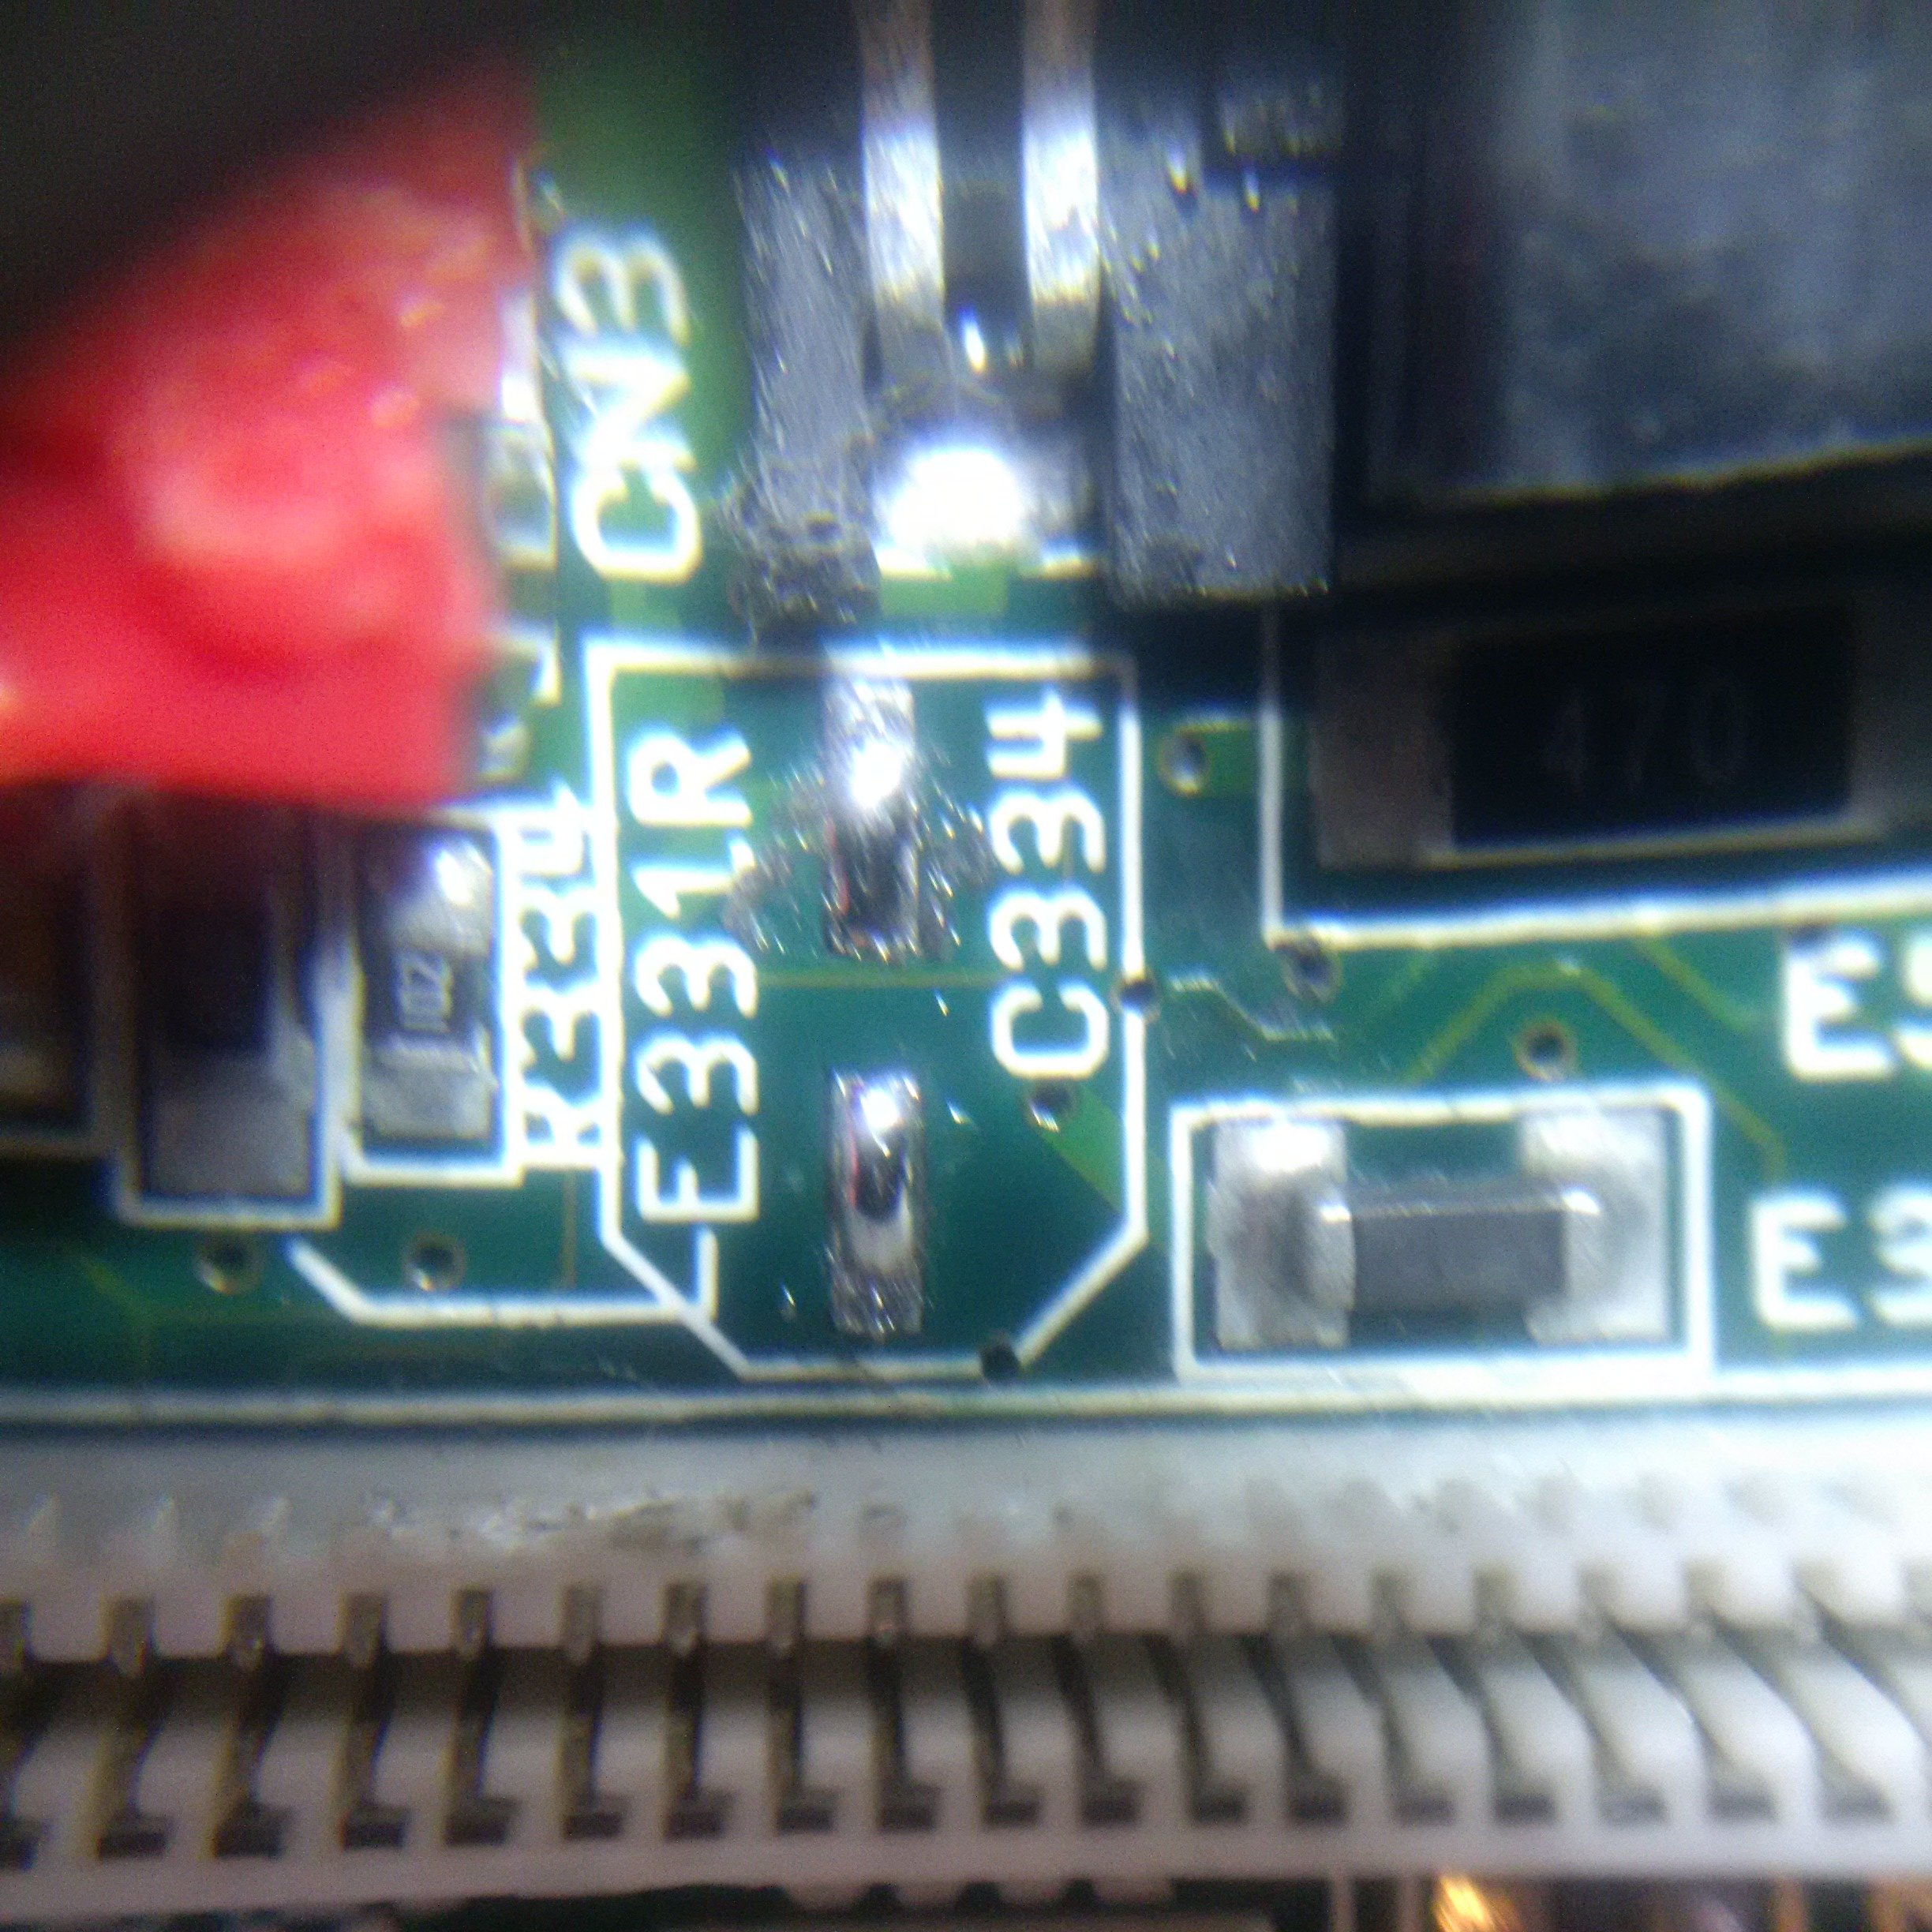 removed_capacitor.jpg